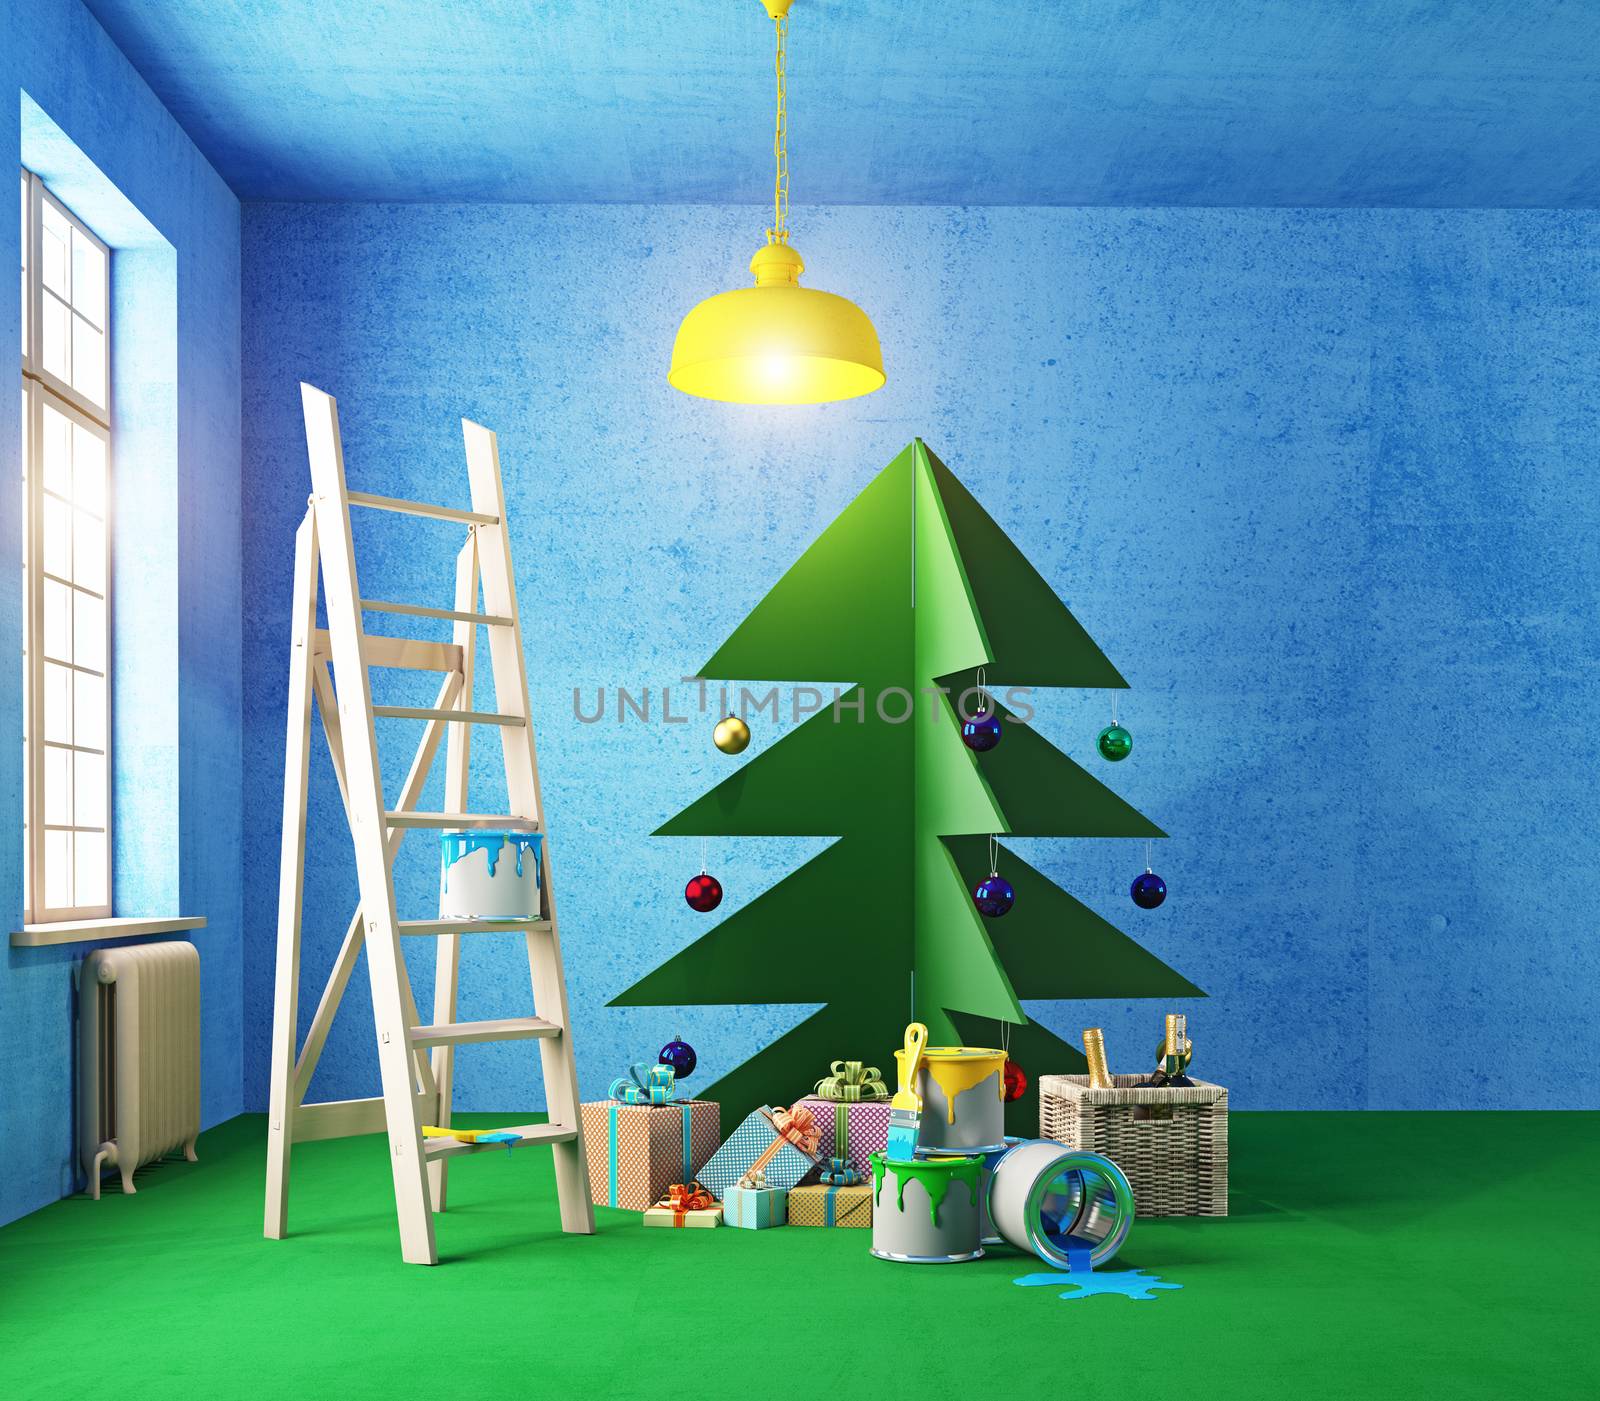 plywood Christmas tree interior nature colors room painting. 3d concept